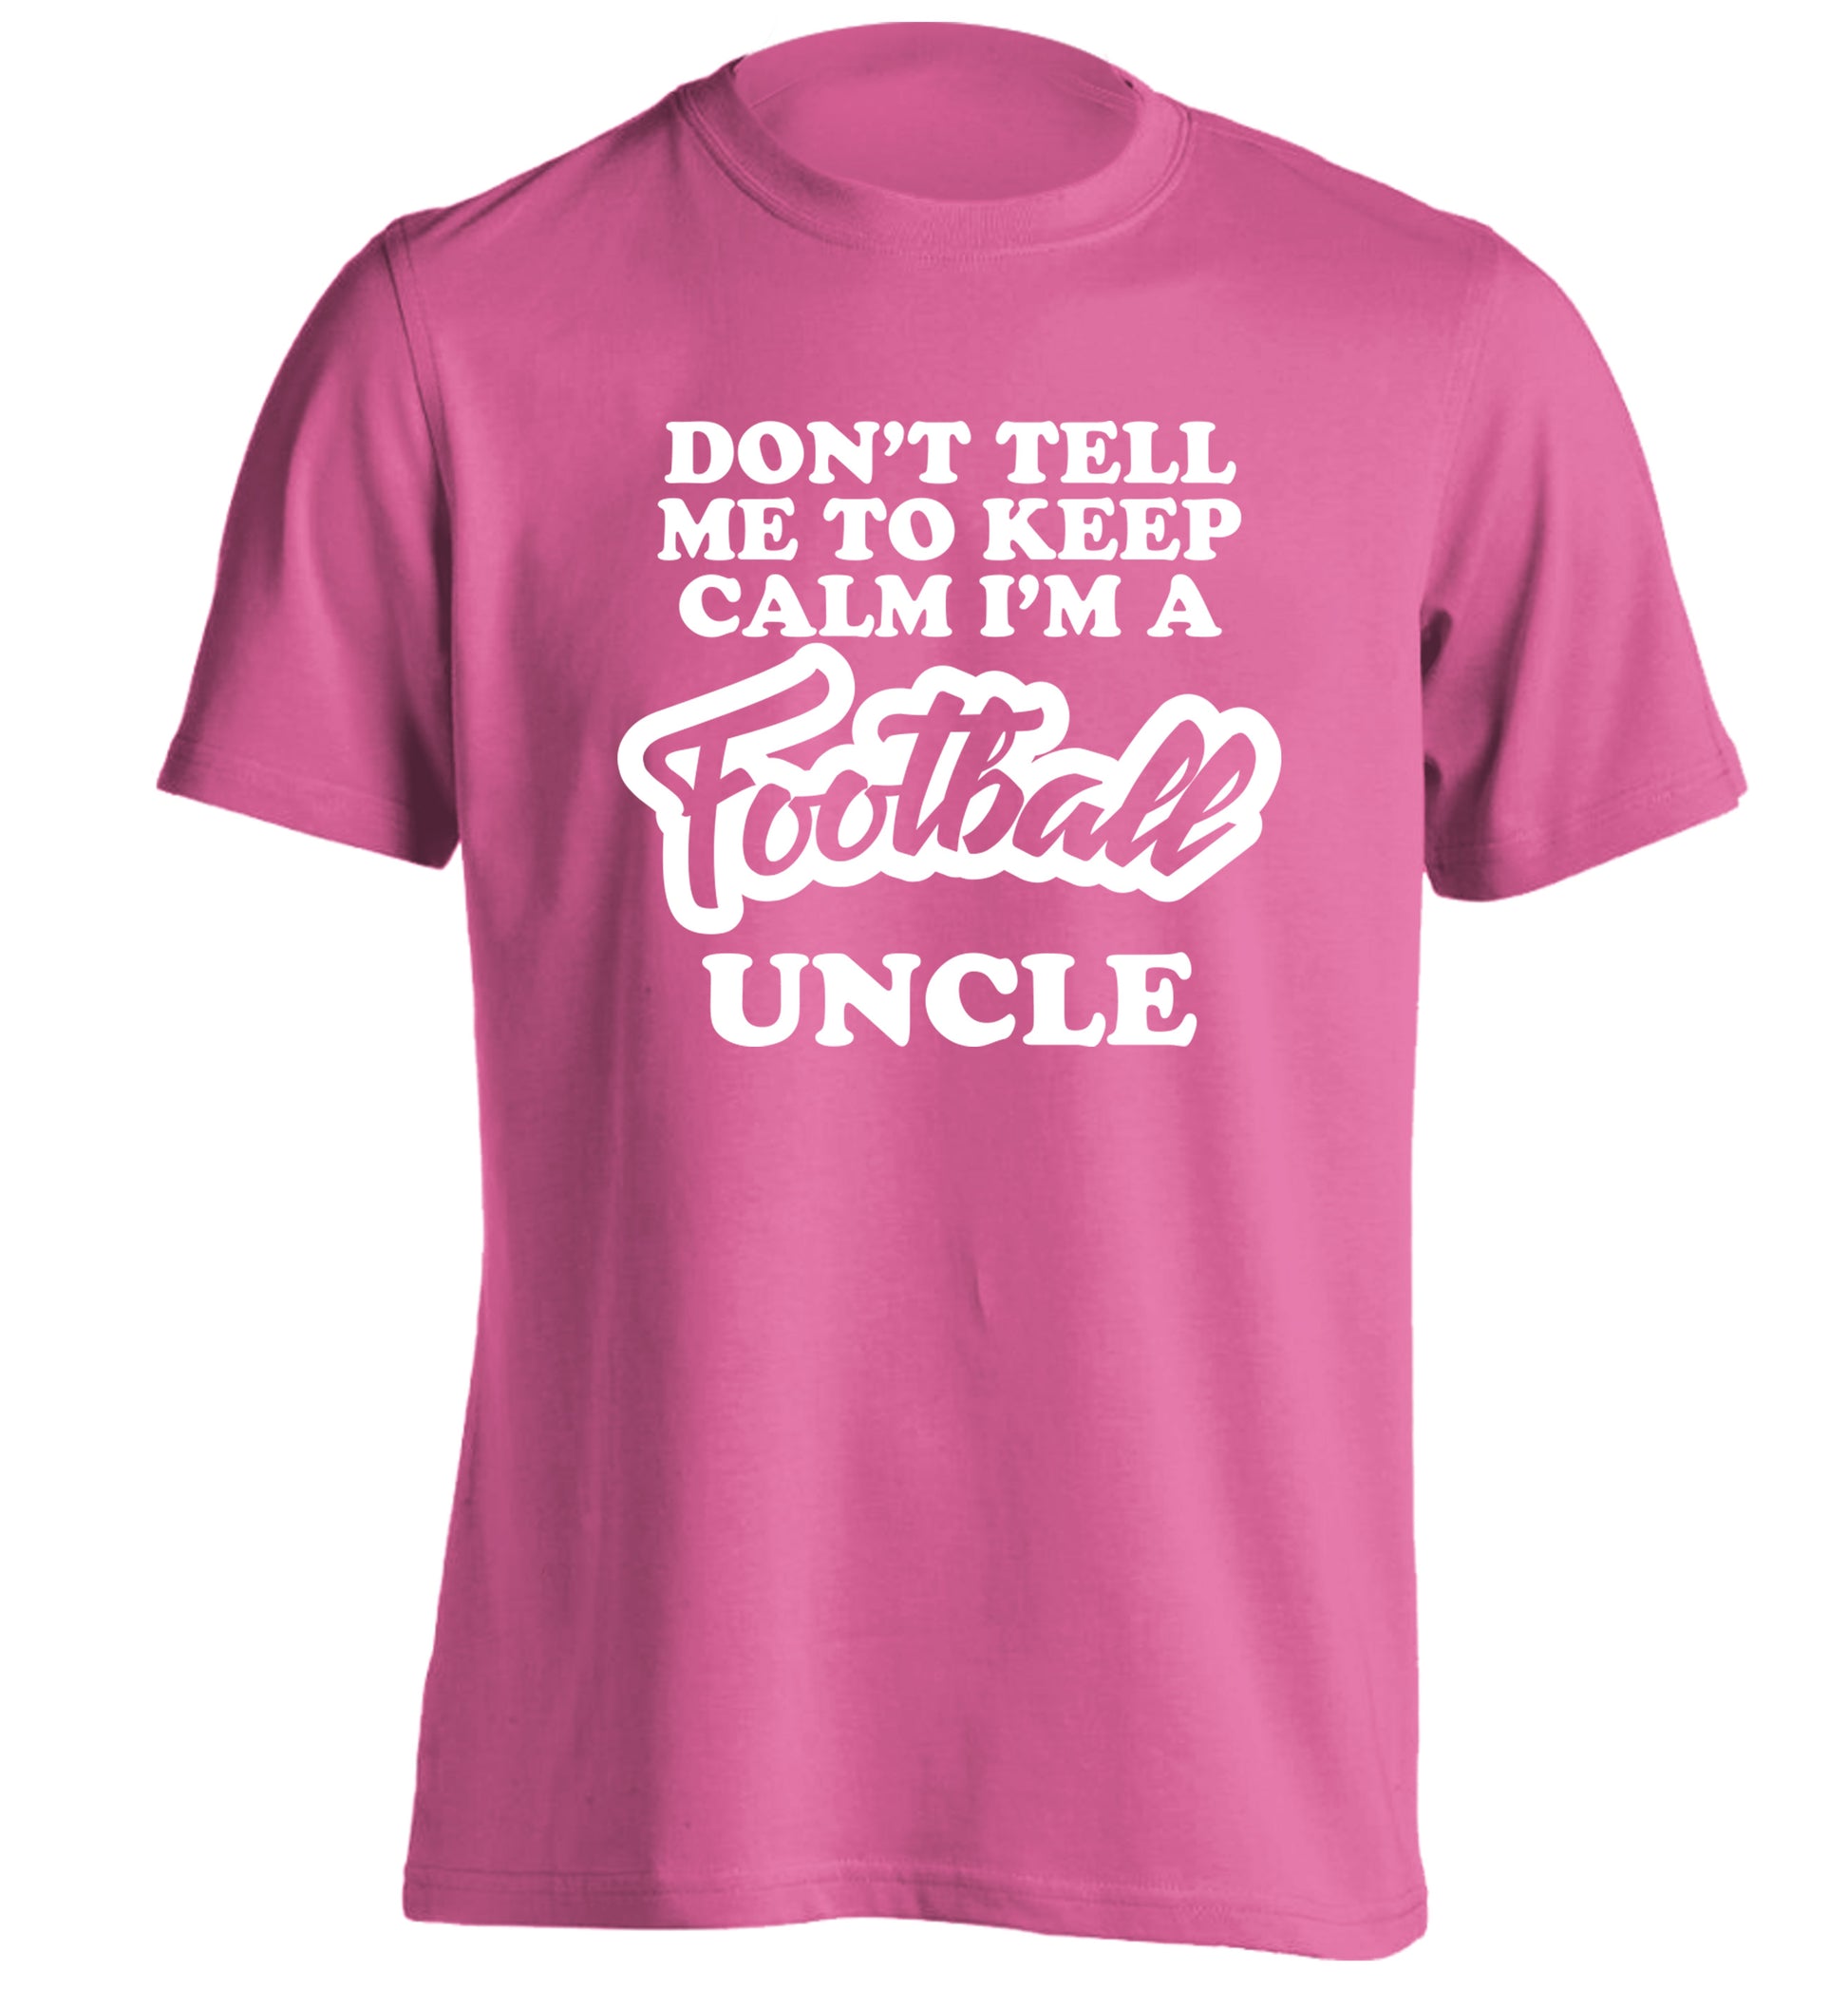 Don't tell me to keep calm I'm a football uncle adults unisexpink Tshirt 2XL